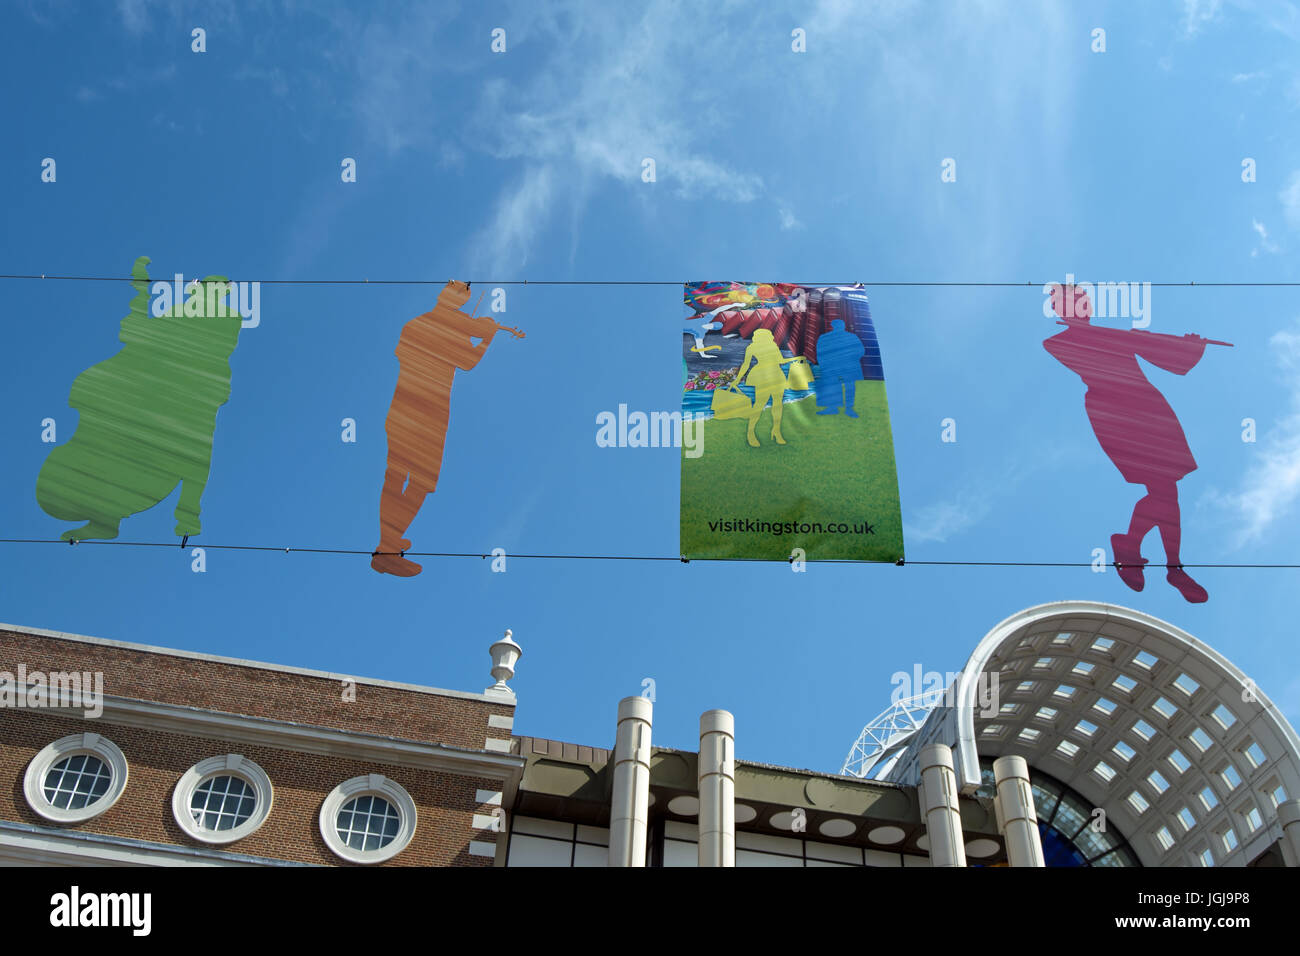 raised cutout figures intended to promote and encourage events and activities in kingston upon thames, surrey, england Stock Photo